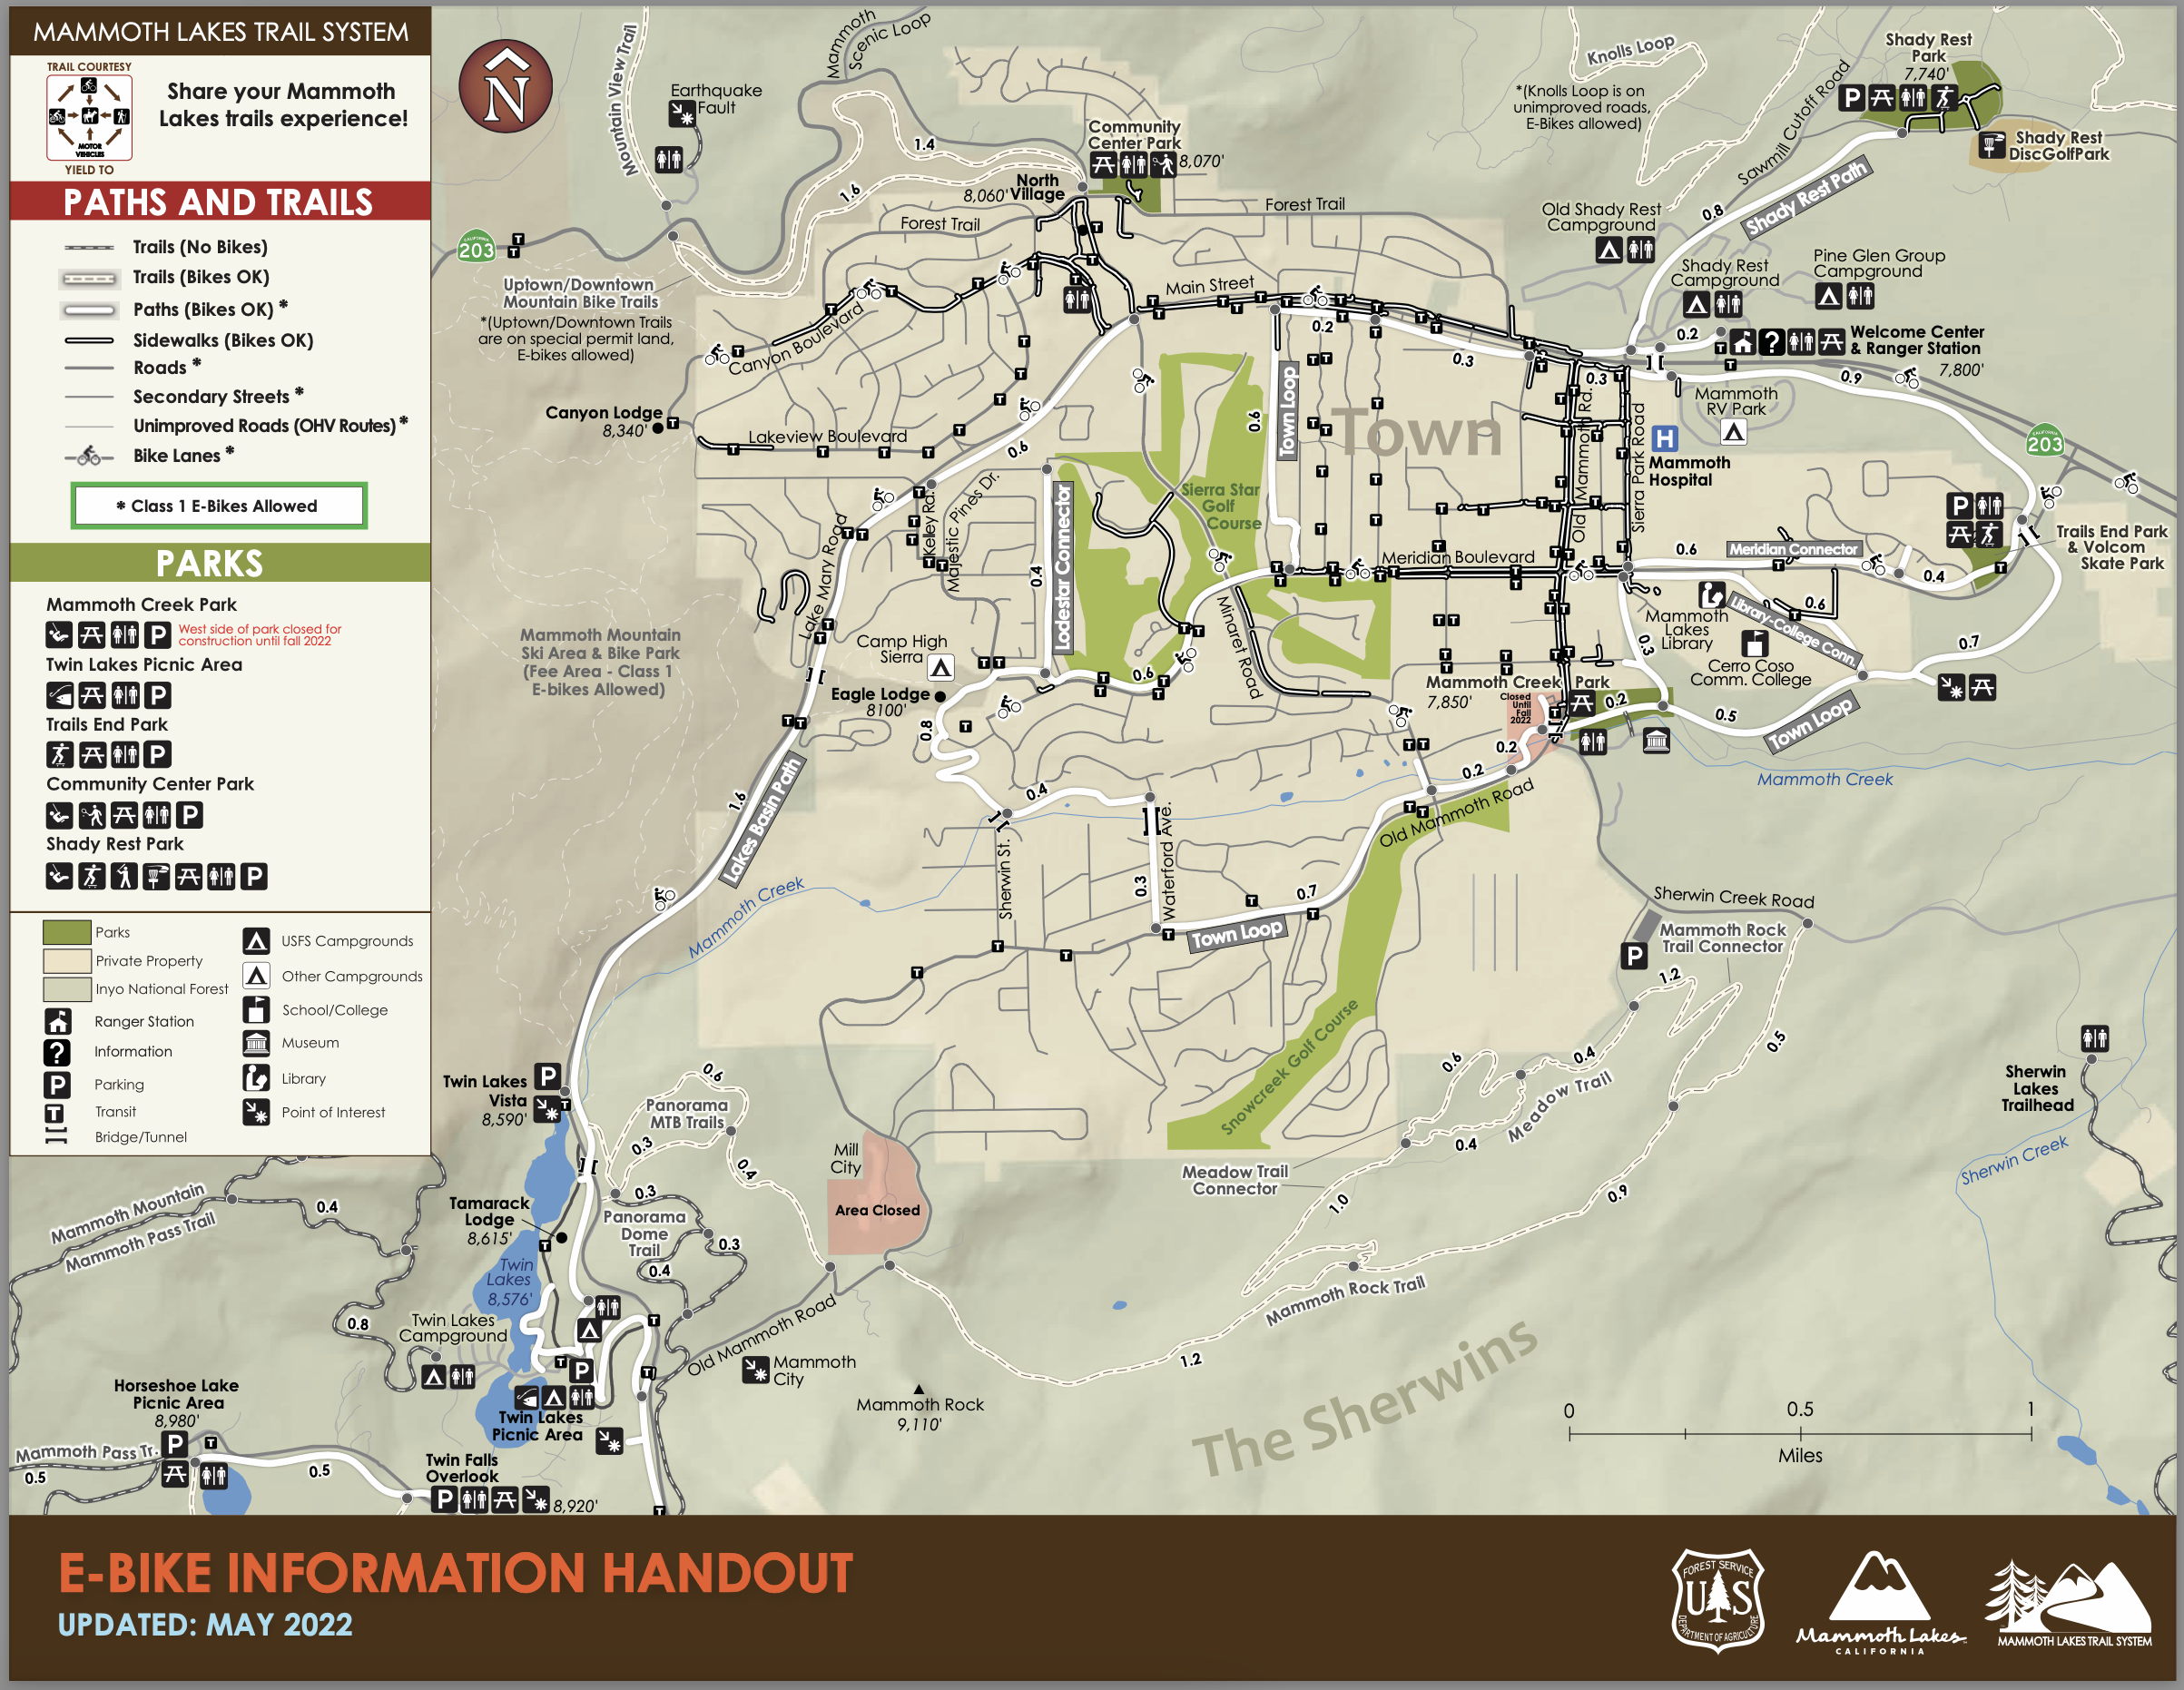 Mammoth Lakes Trail Map from MammothTrails.org